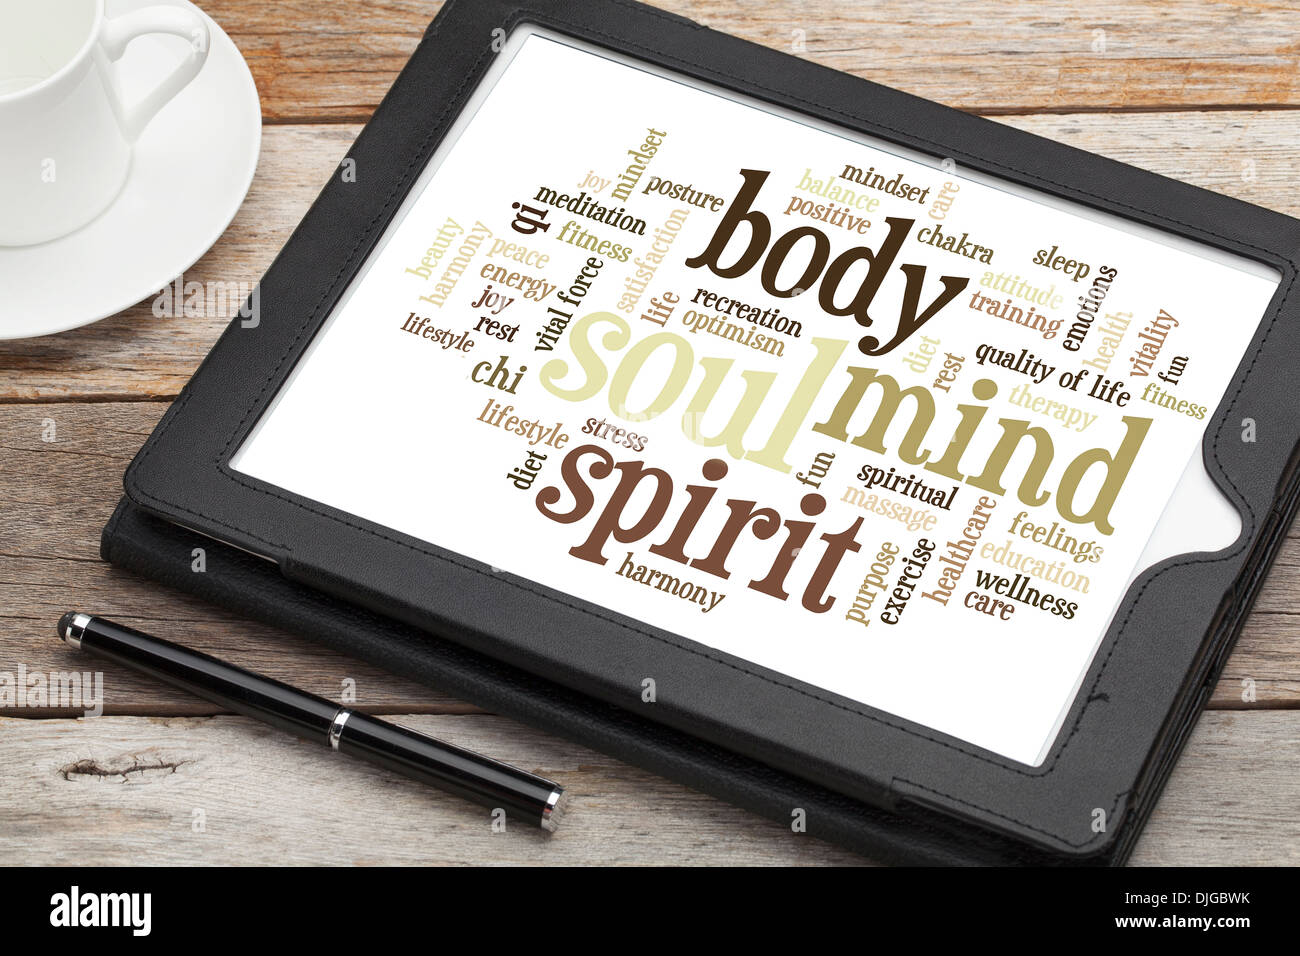 mind, body, spirit and soul - word cloud on a digital tablet Stock Photo